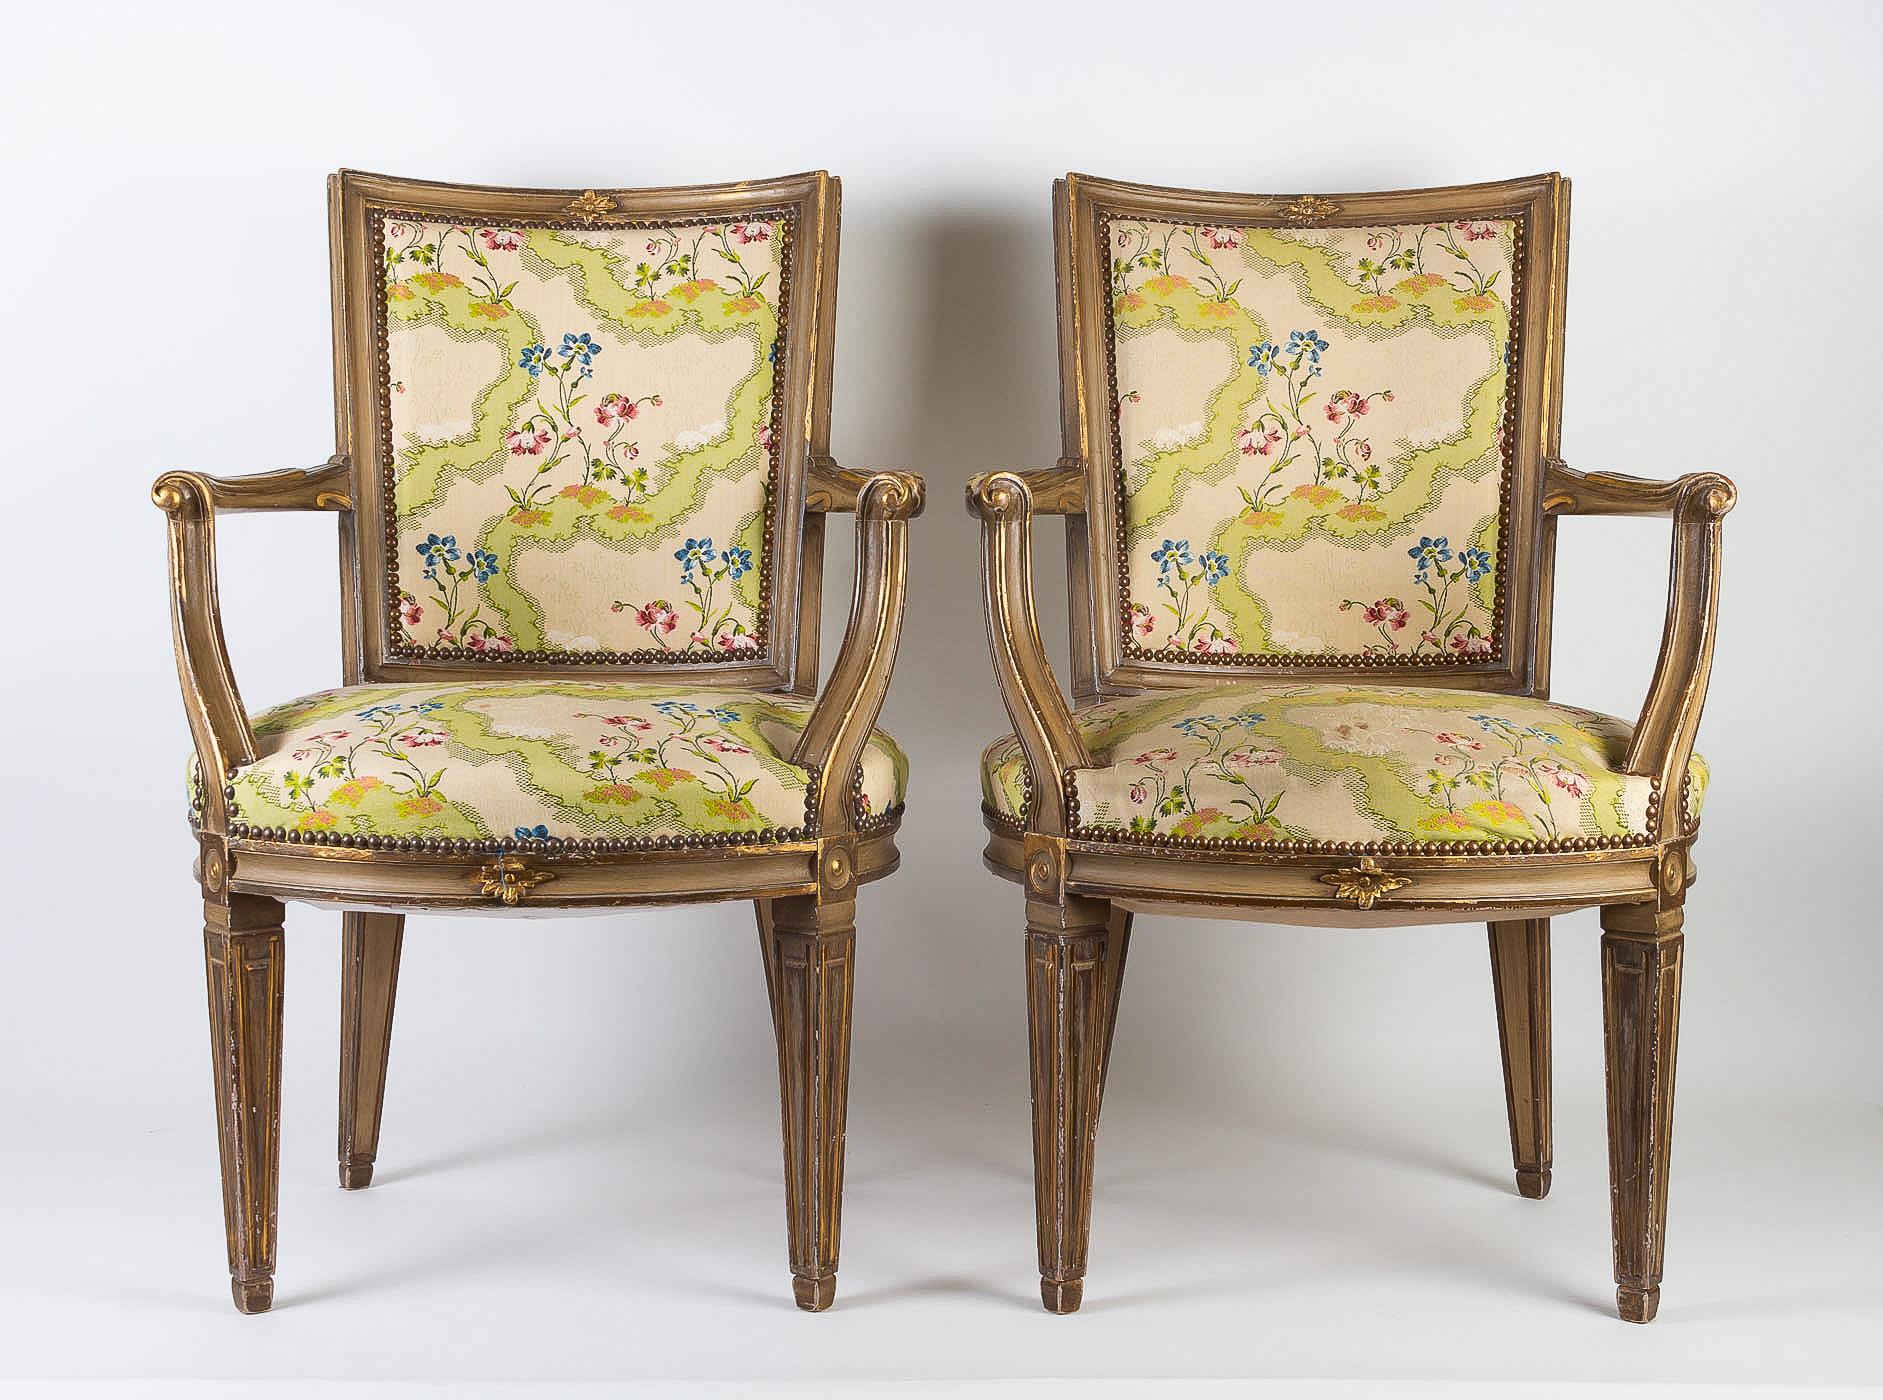 Louis XVI Restaurant The 1728, a Set of Six Armchairs in the Style of 18th Century For Sale